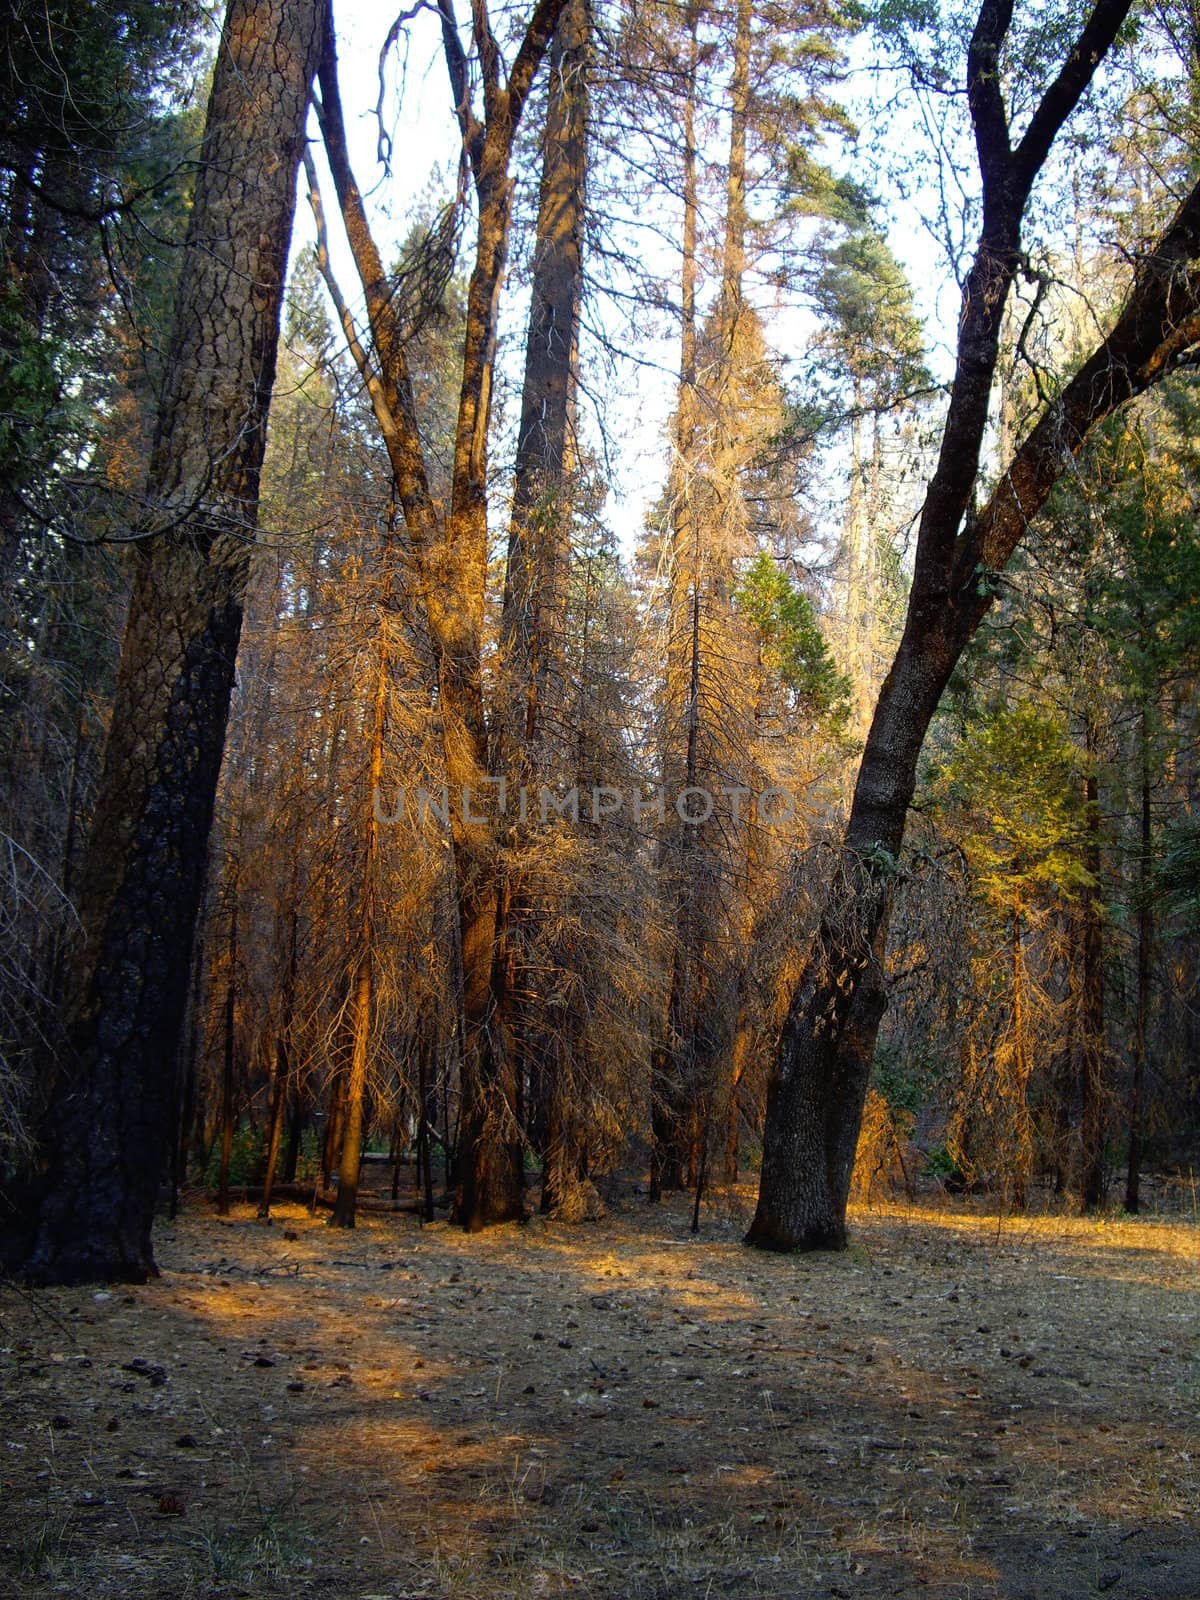 Sunlight through the forest in Yosemite National Park, USA